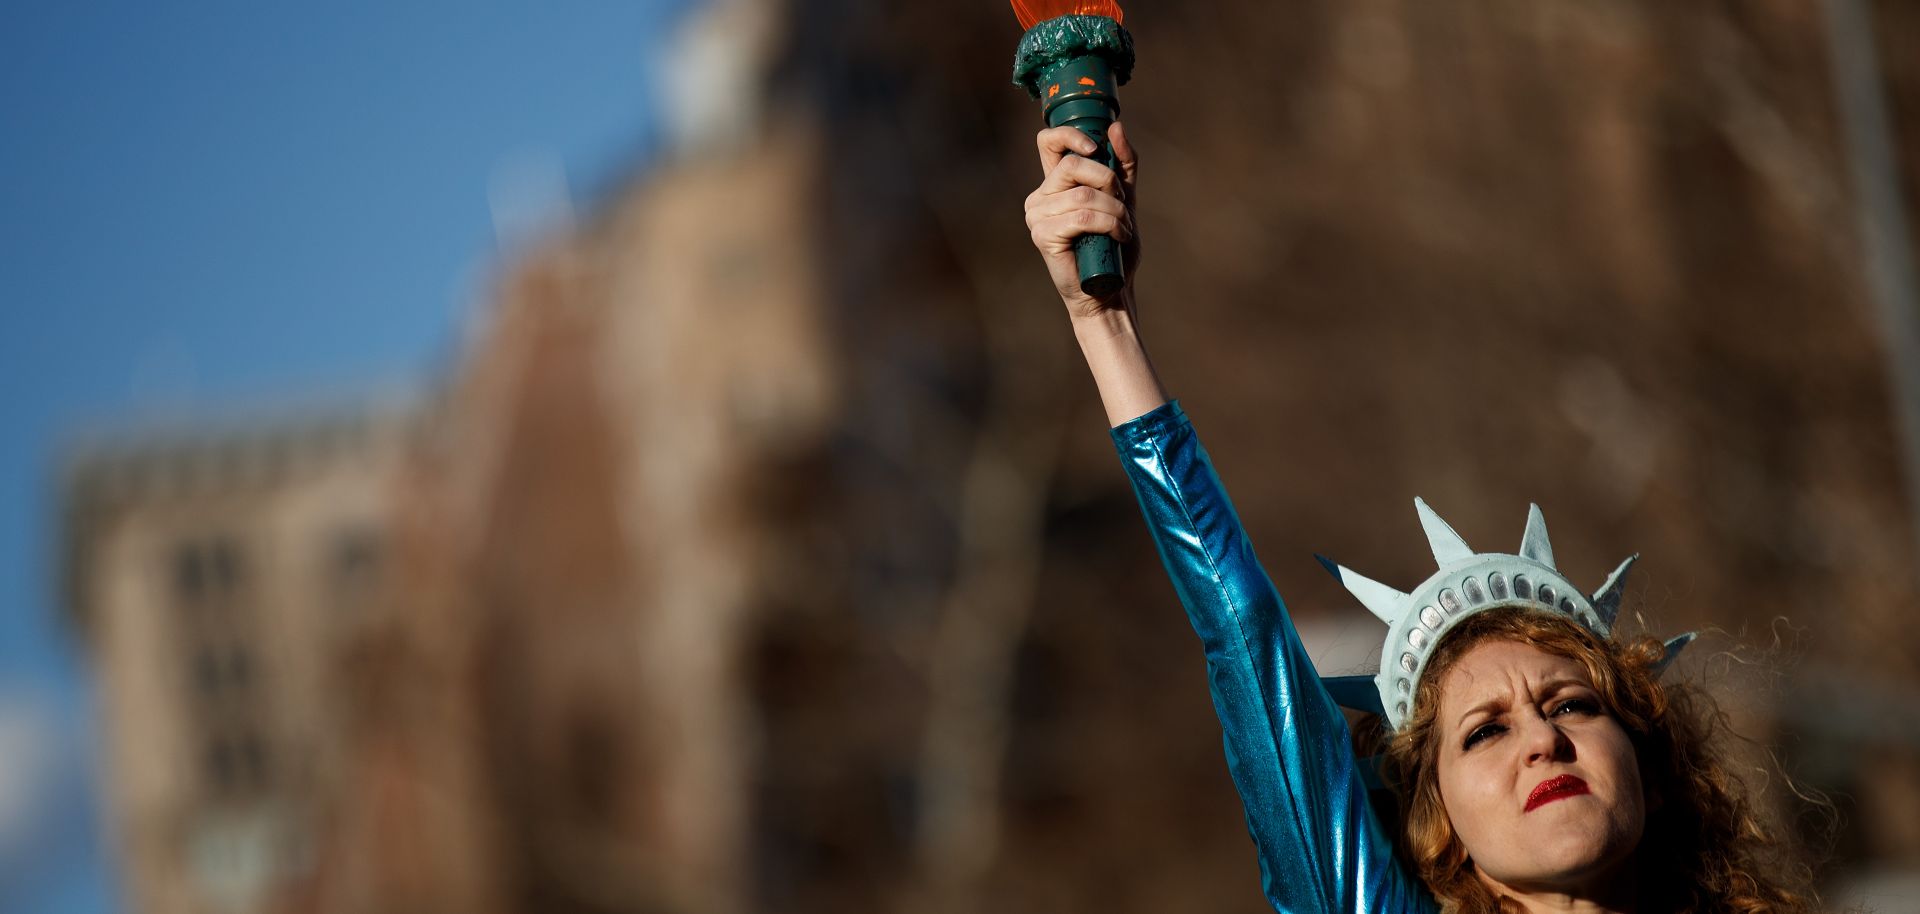 A young woman takes to the stage dressed as the Statue of Liberty for a demonstration on International Women's Day in New York City.